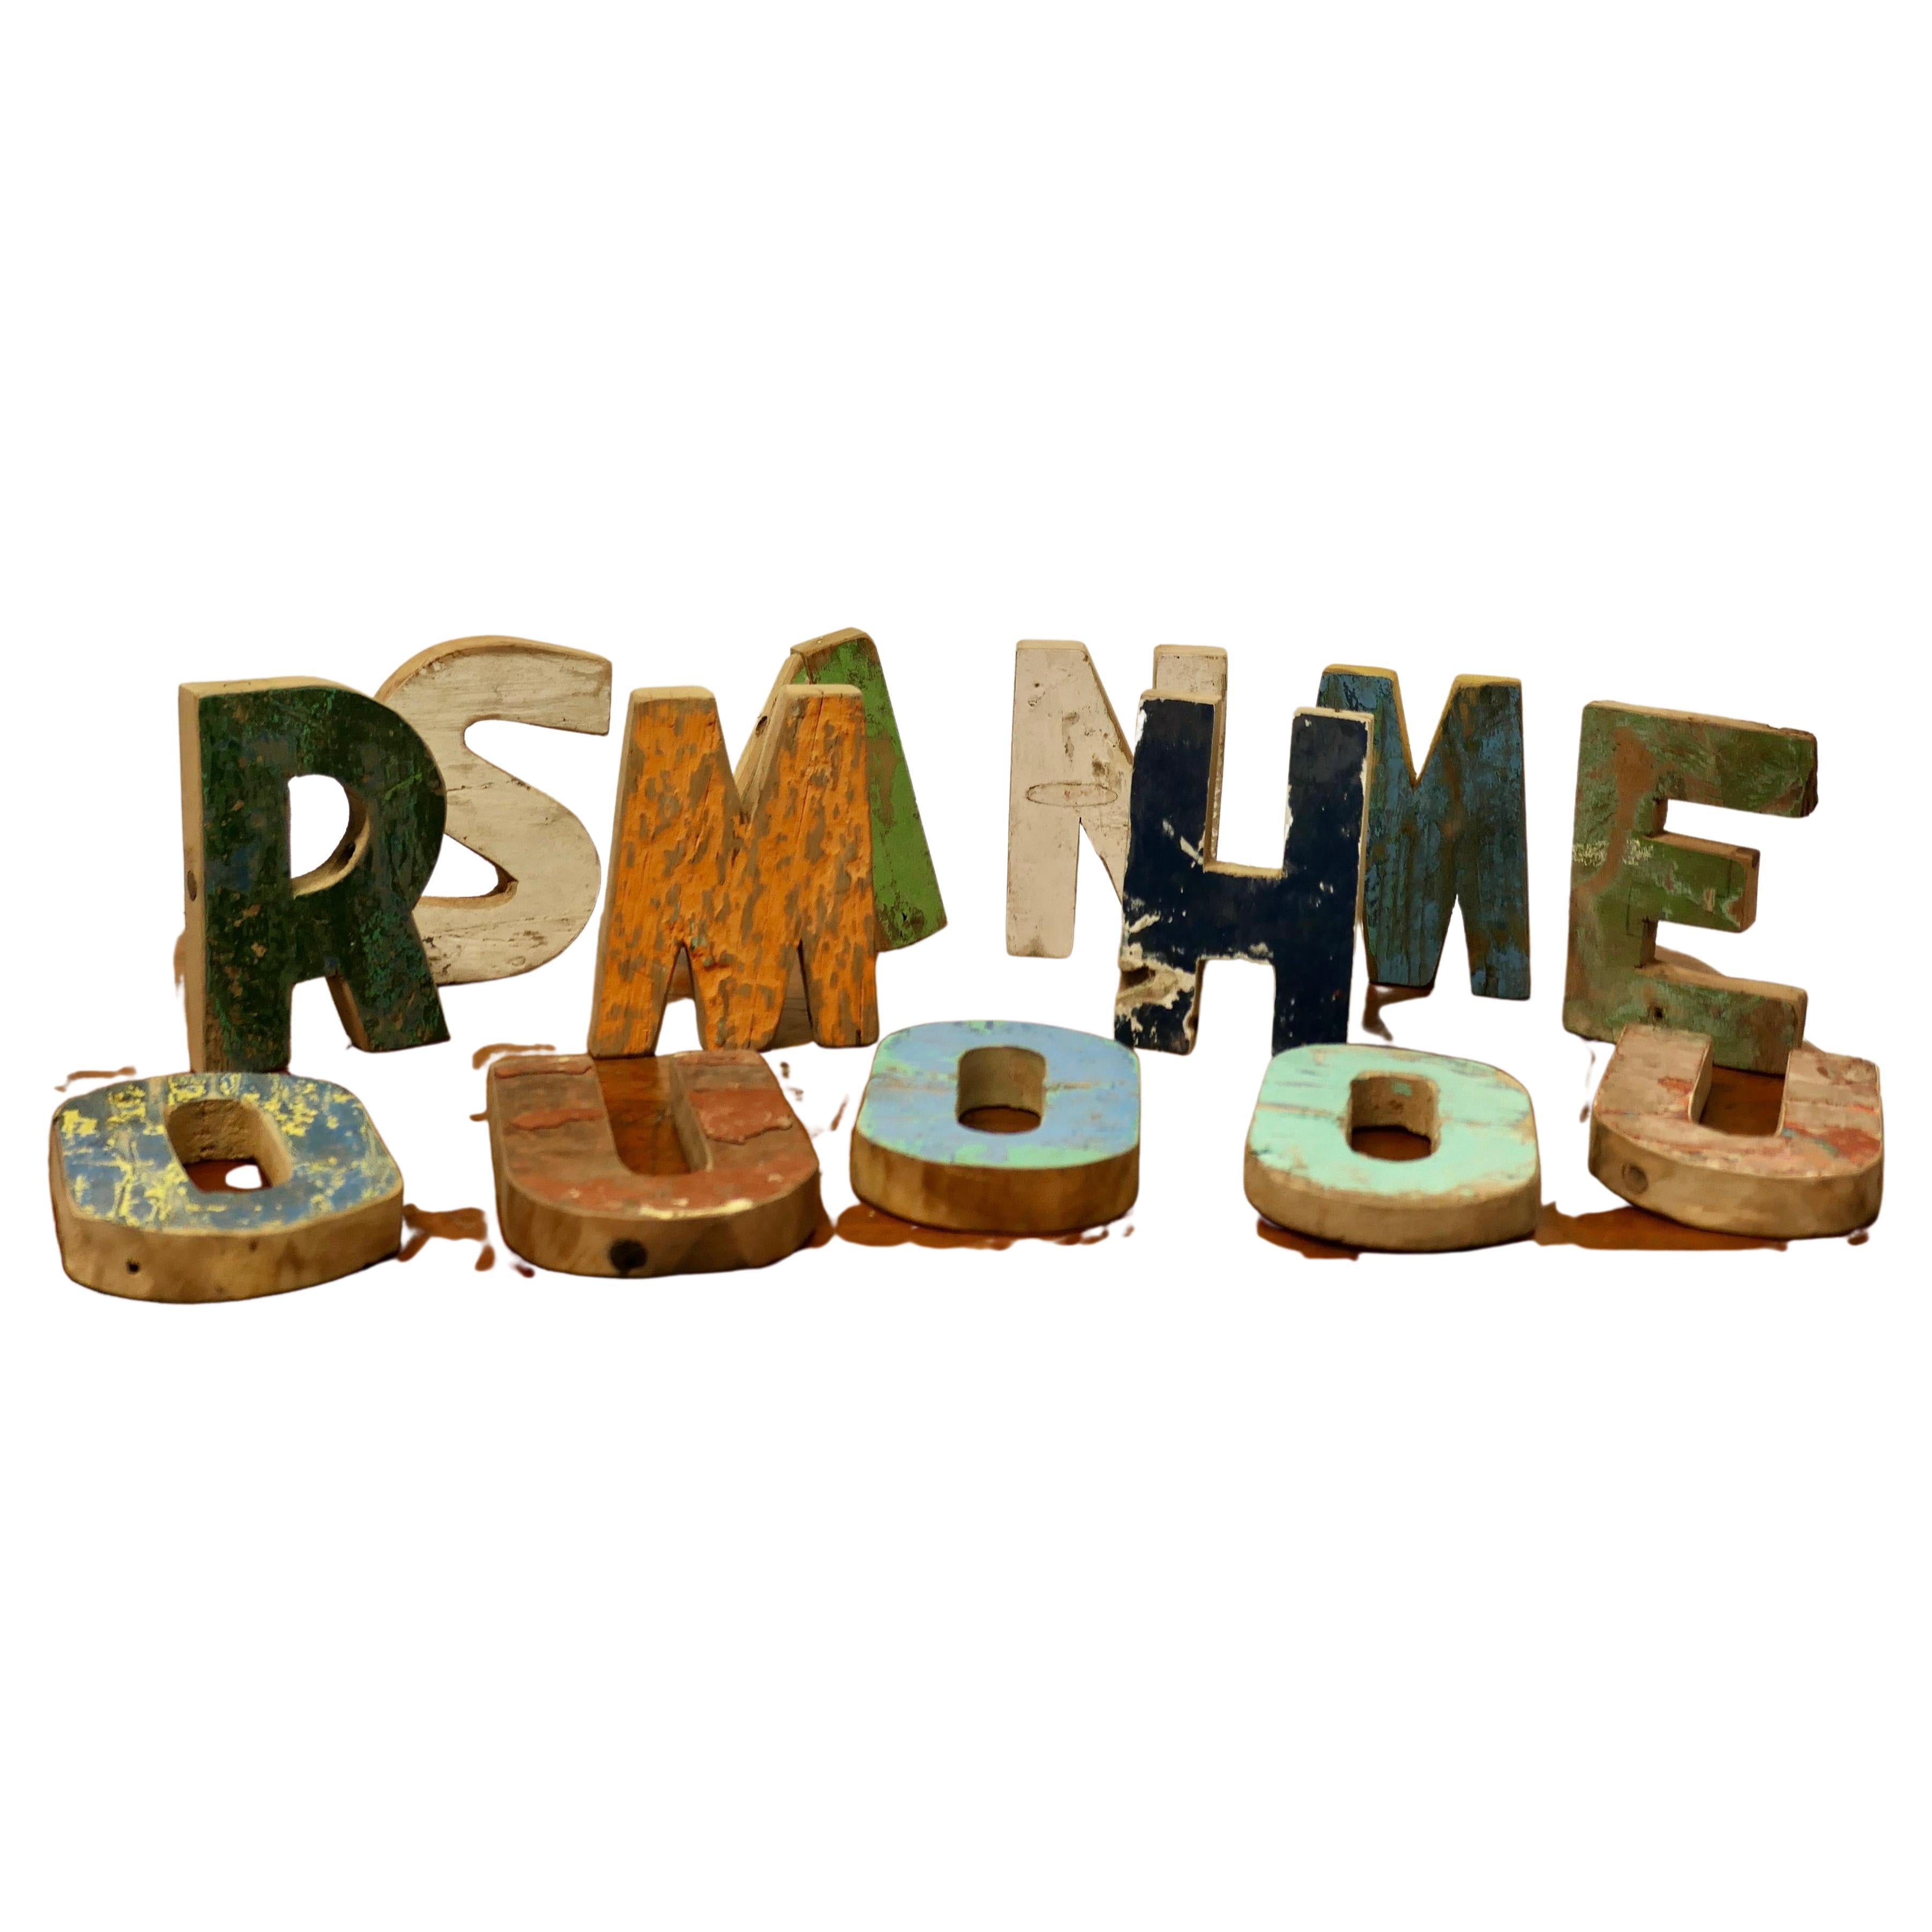 Small Collection of Folk Art Wooden Letters  A Small collection  